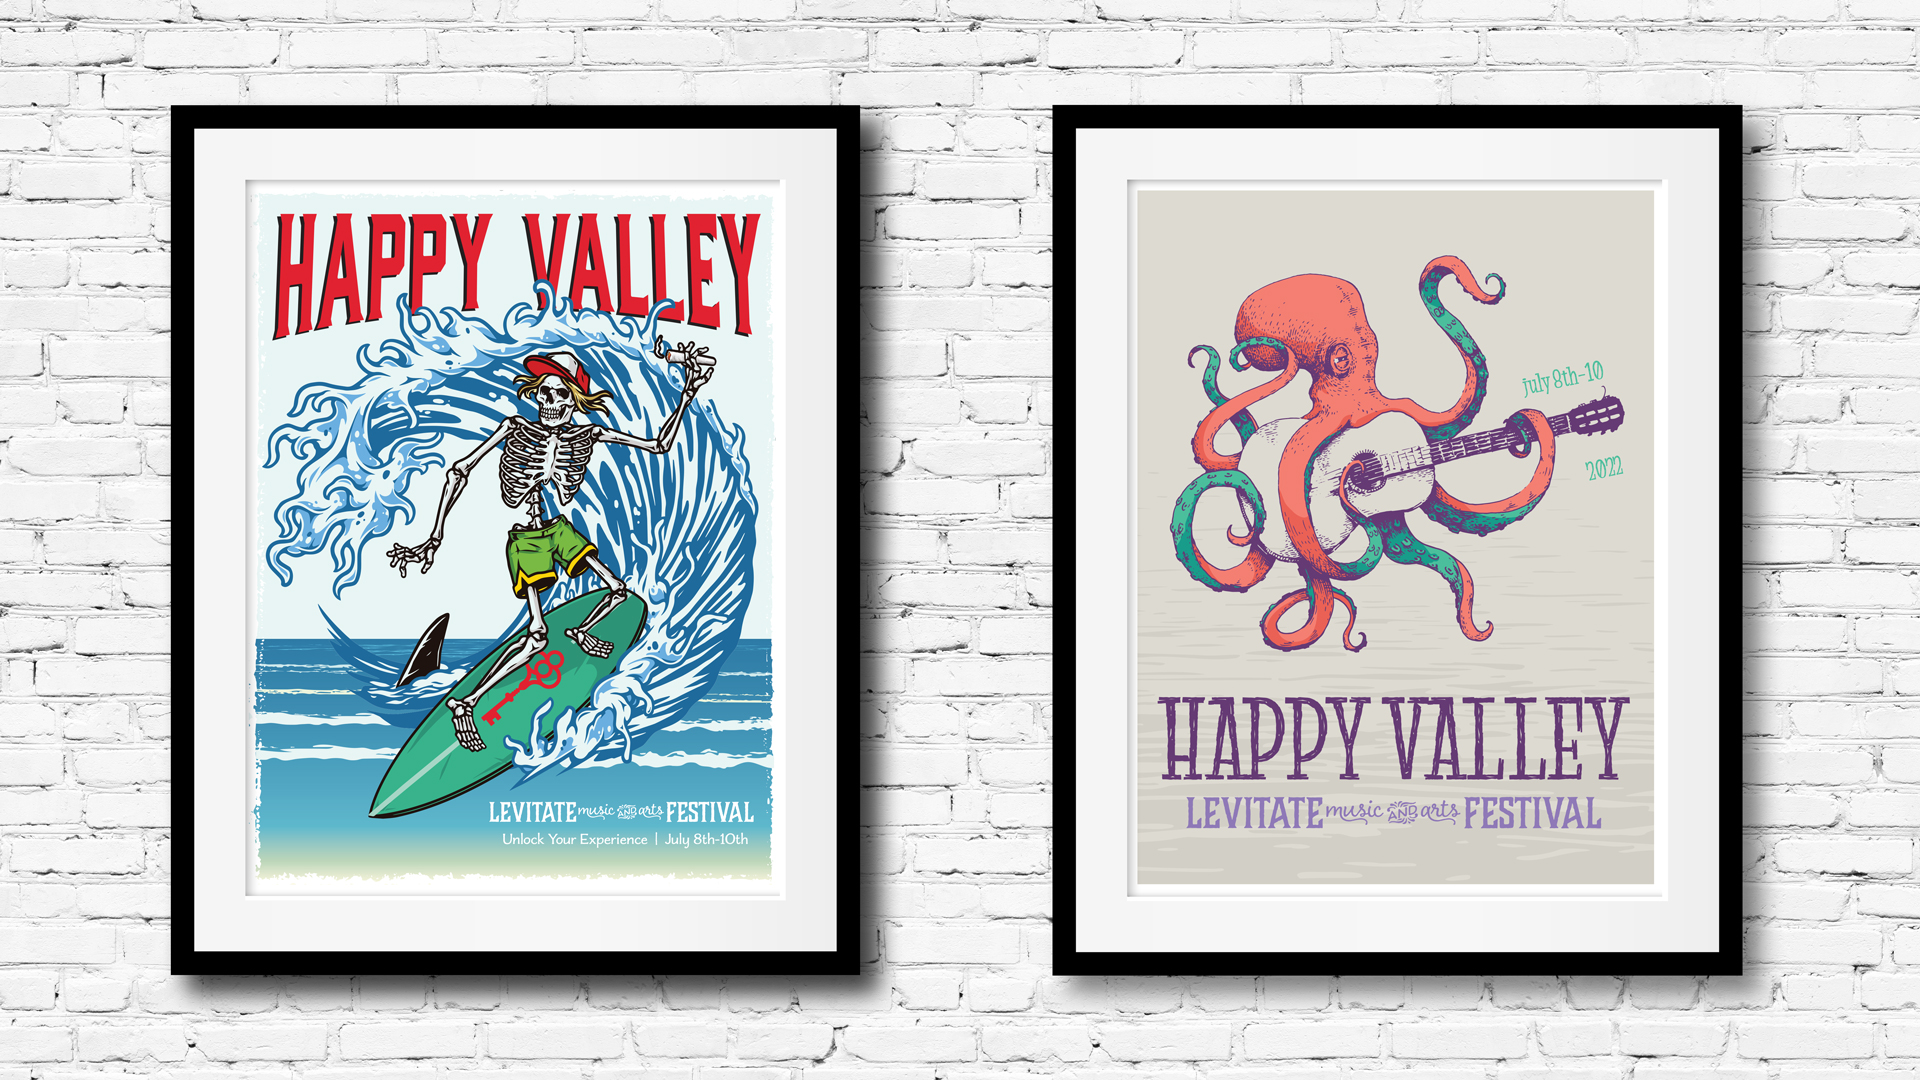 Skeleton and octopus posters for Happy Valley